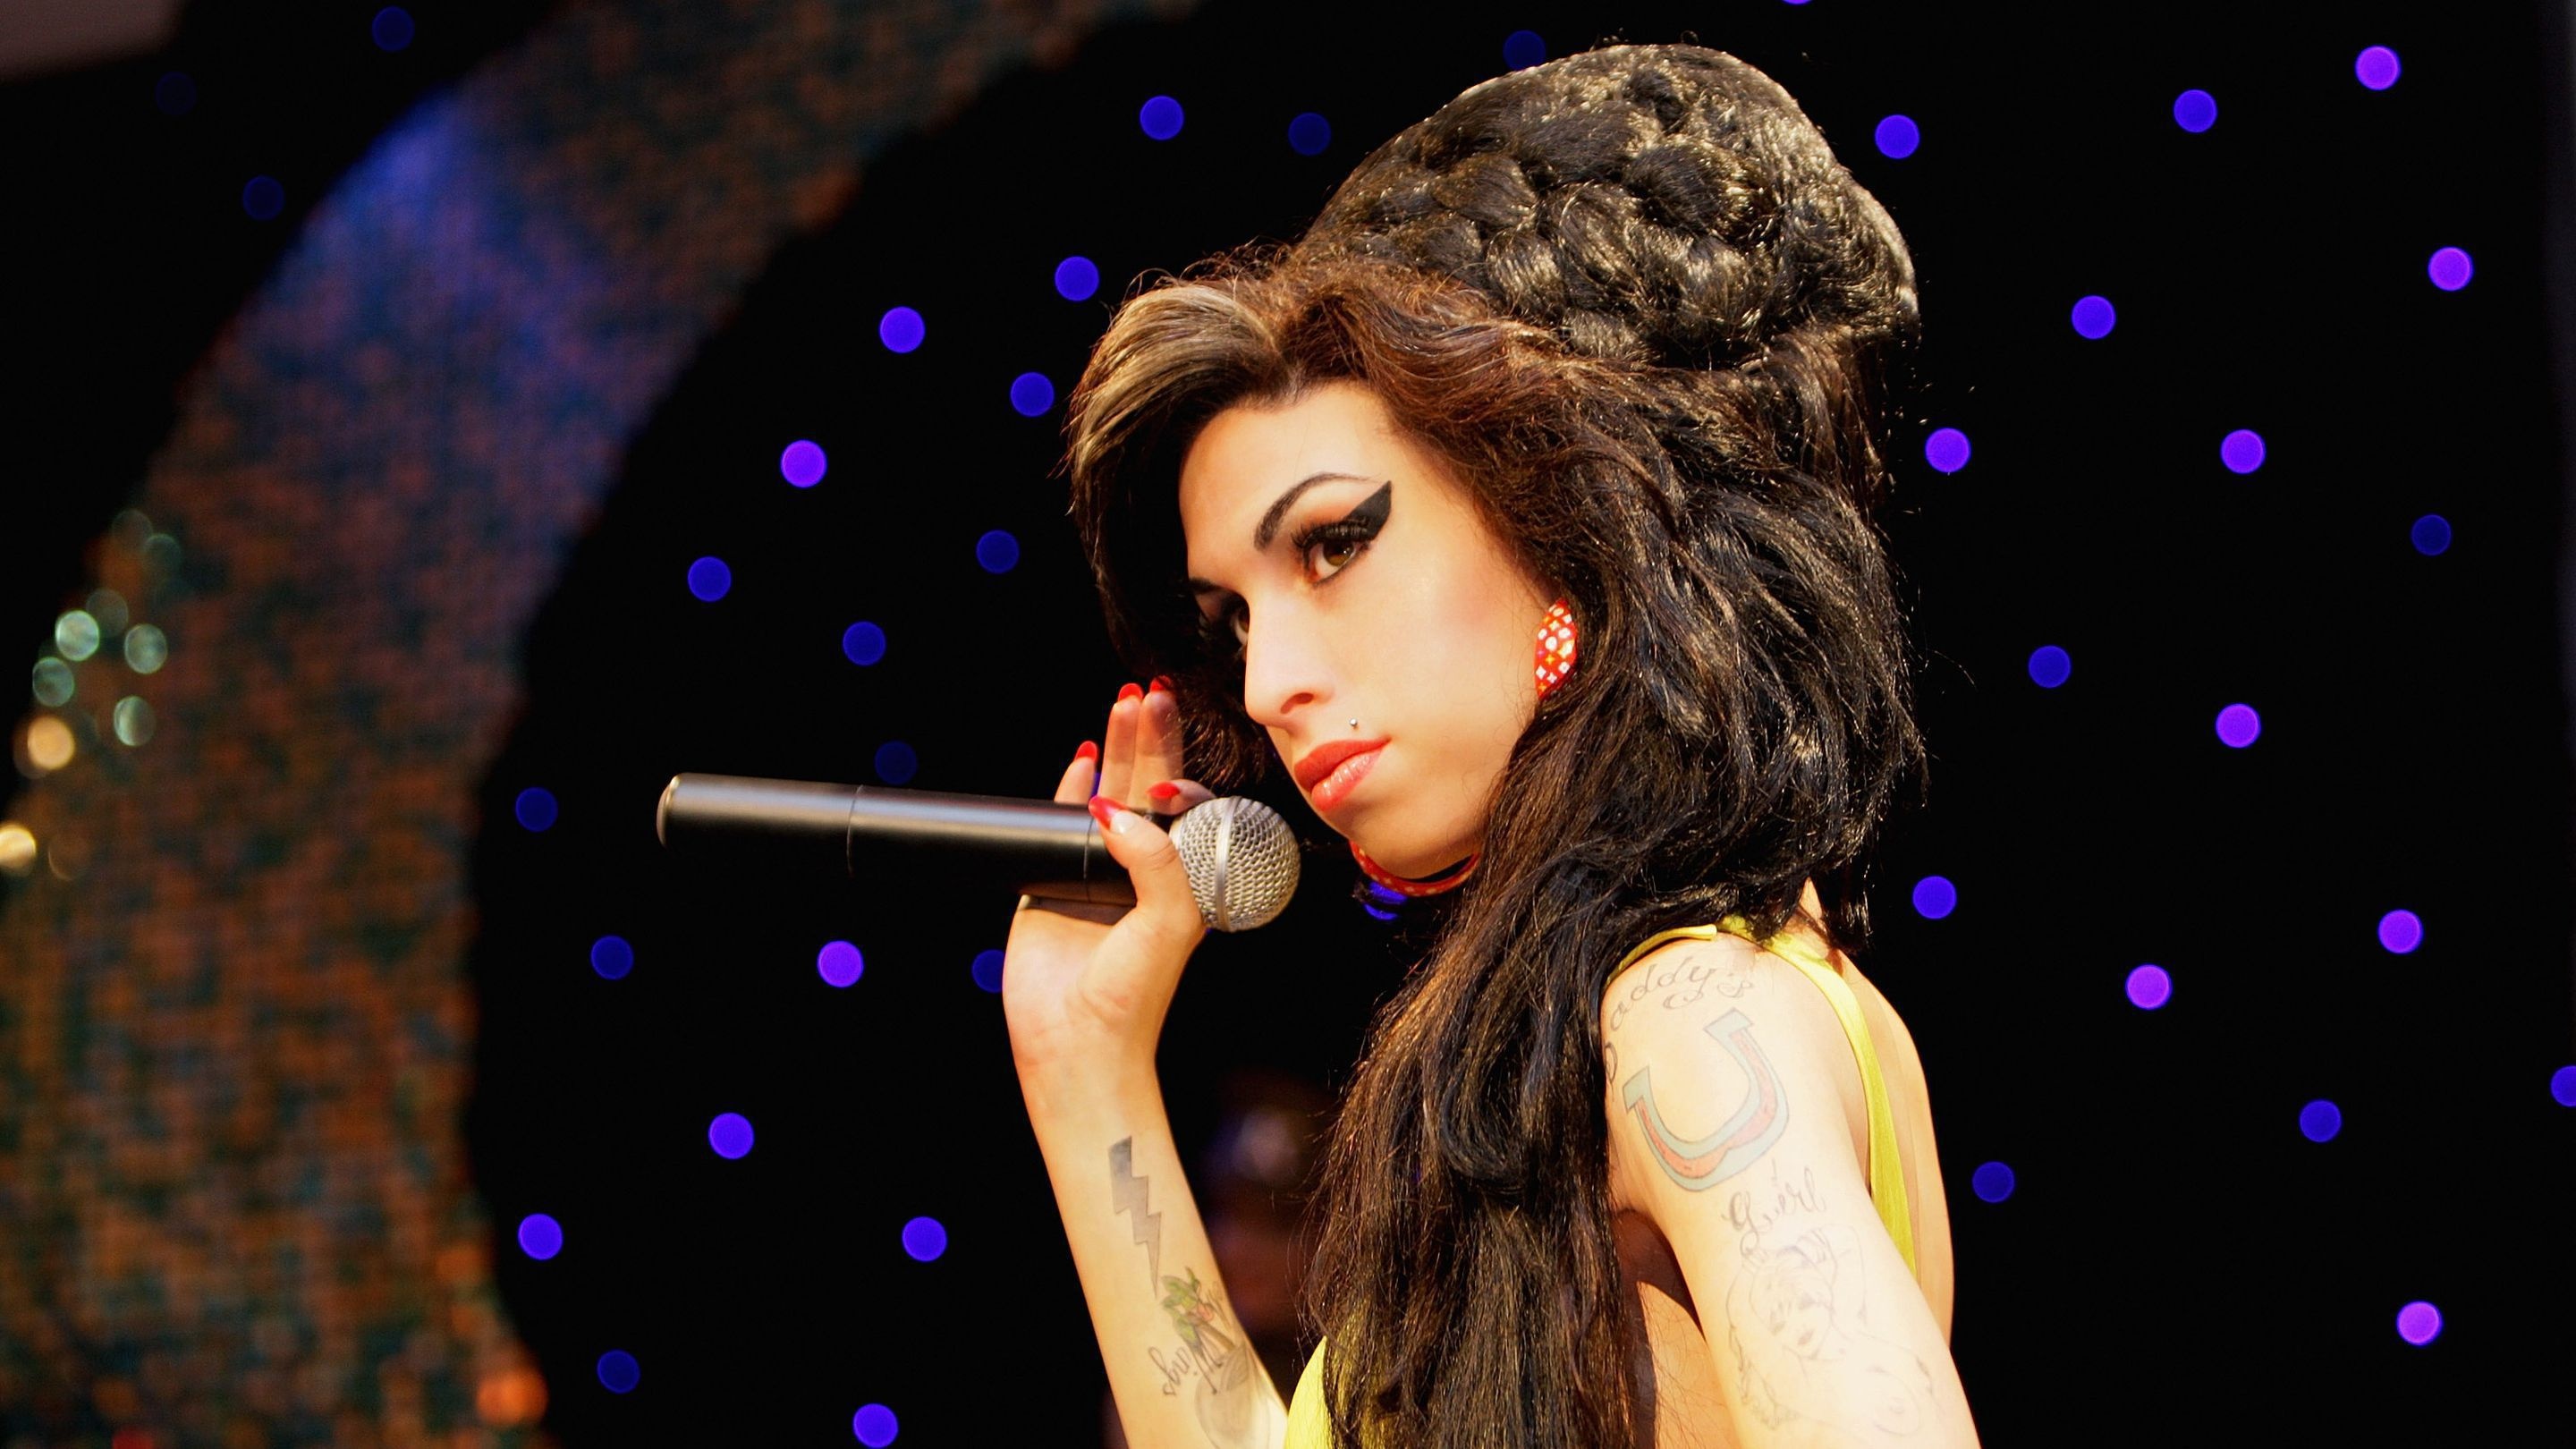 Amy Winehouse, Phone and desktop wallpapers, Picture-perfect photos, 2880x1620 HD Desktop